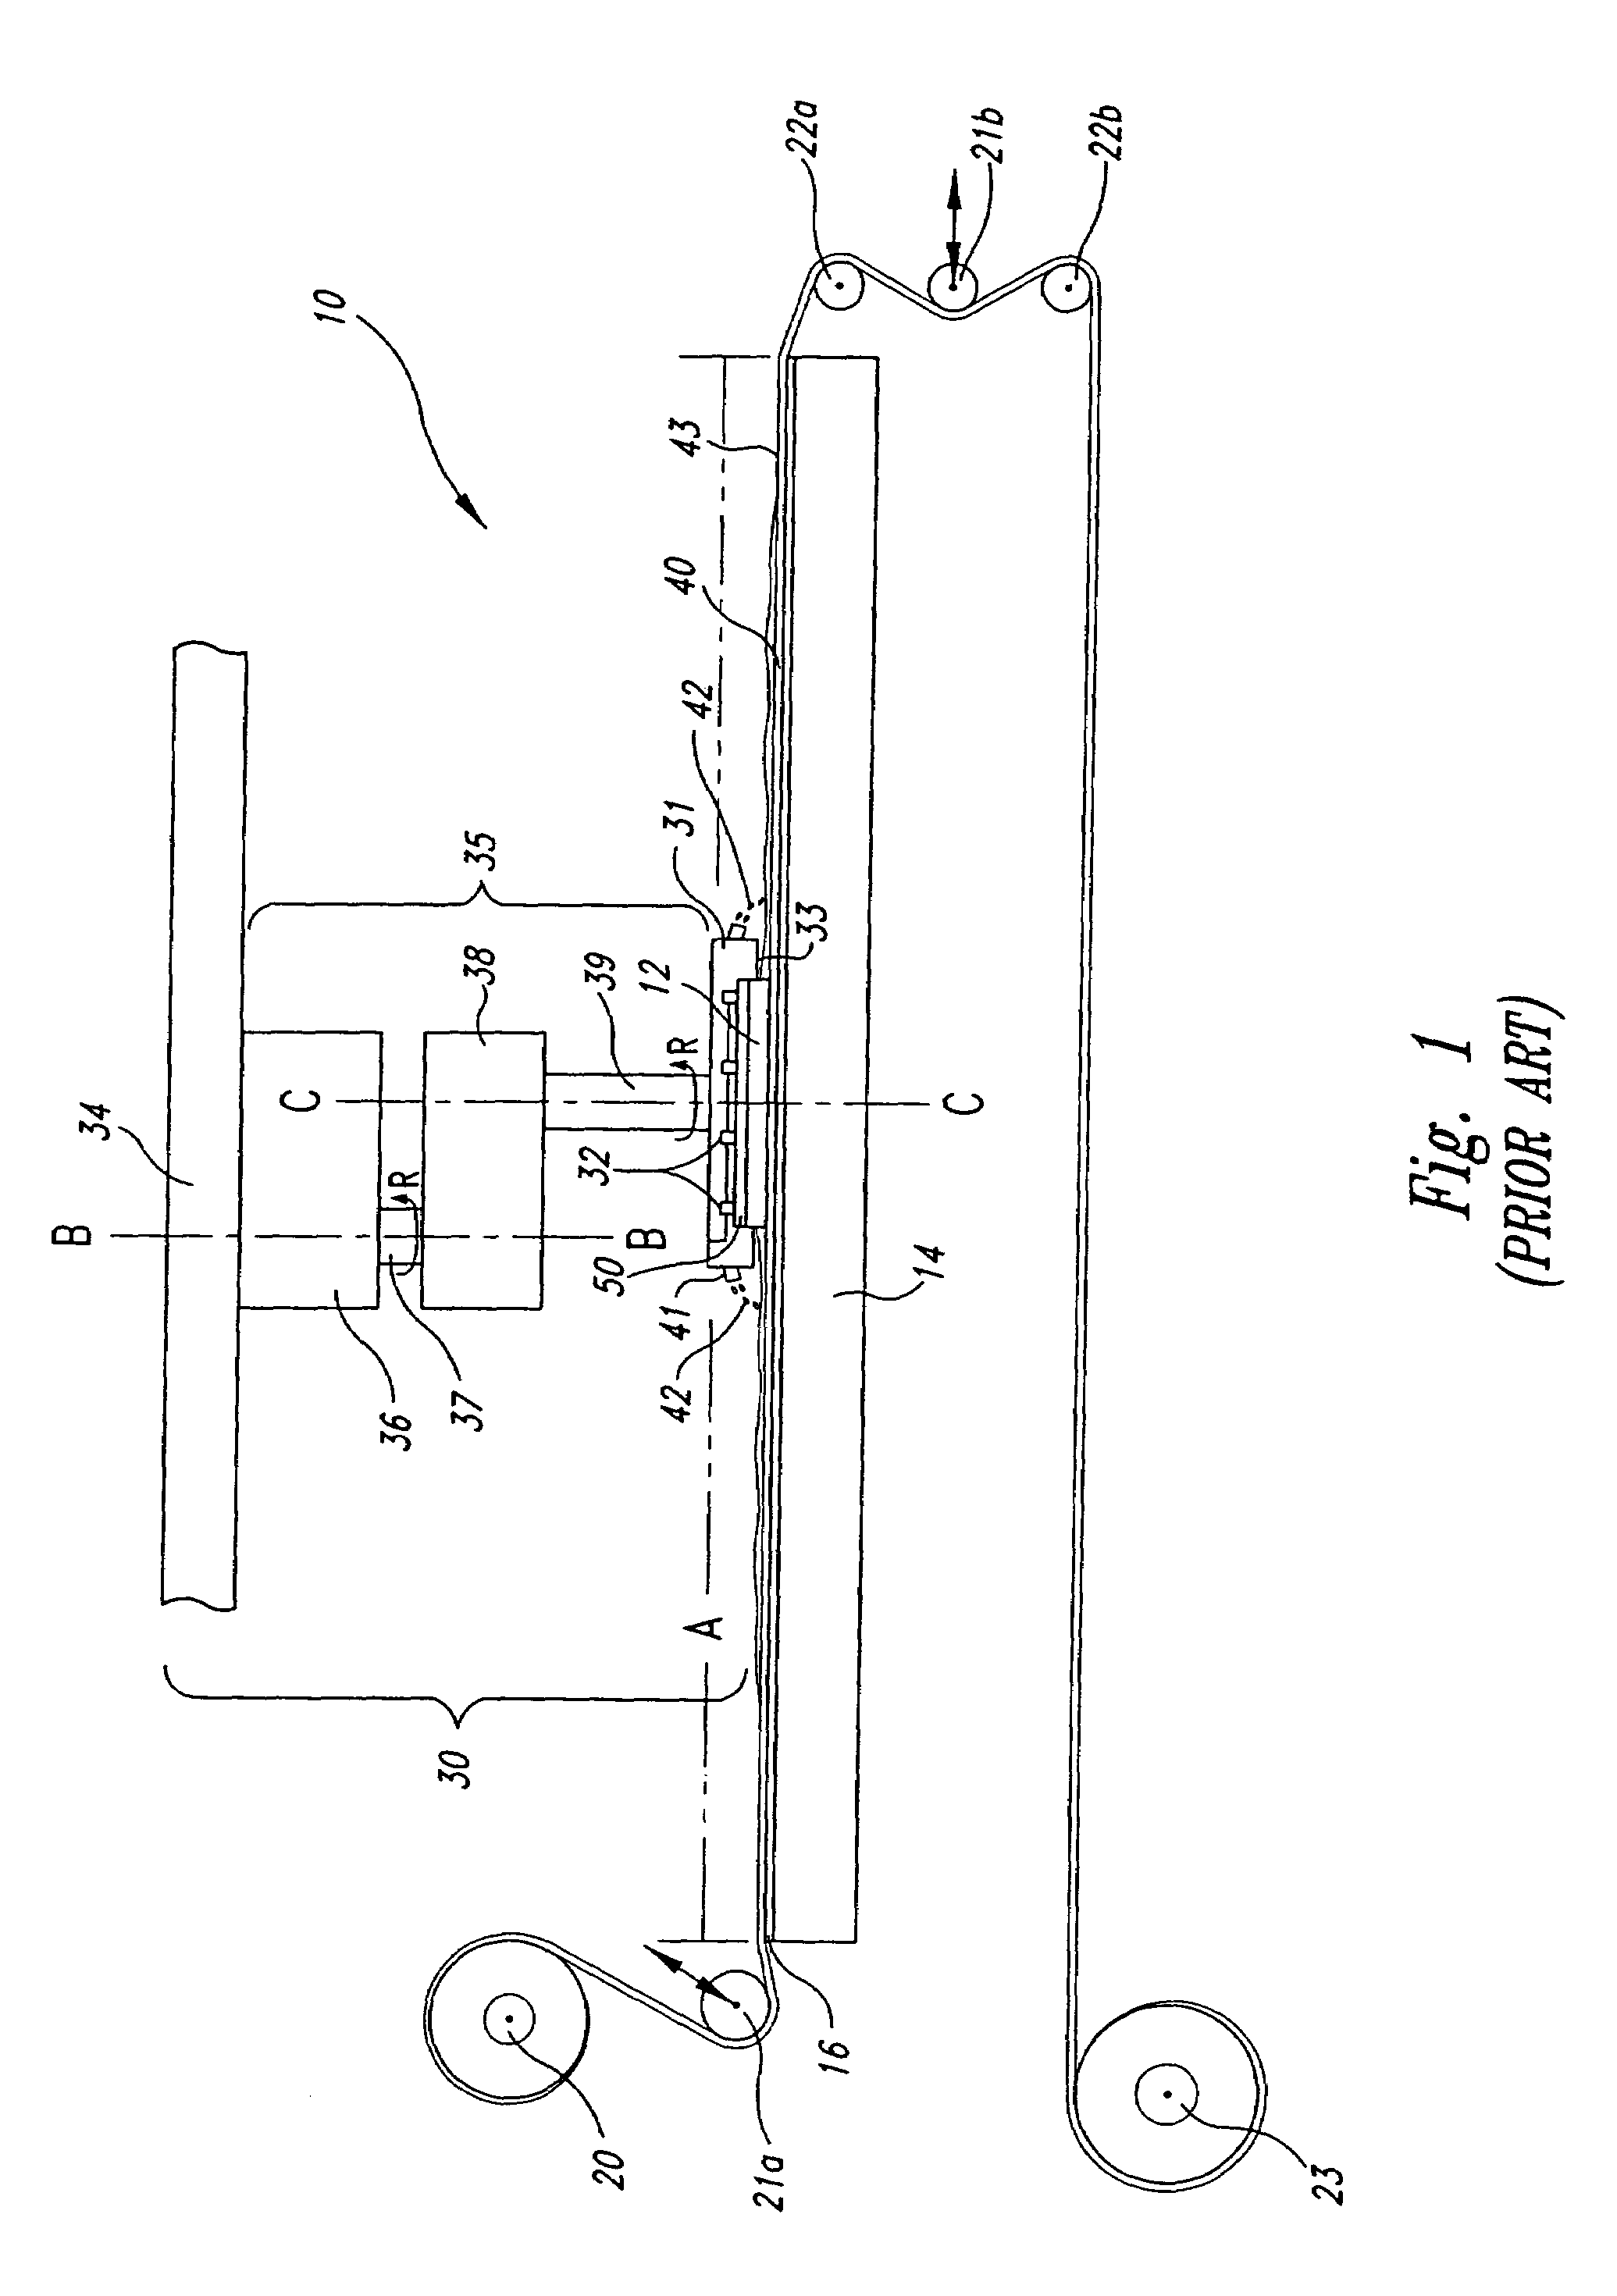 Planarizing solutions, planarizing machines and methods for mechanical or chemical-mechanical planarization of microelectronic-device substrate assemblies